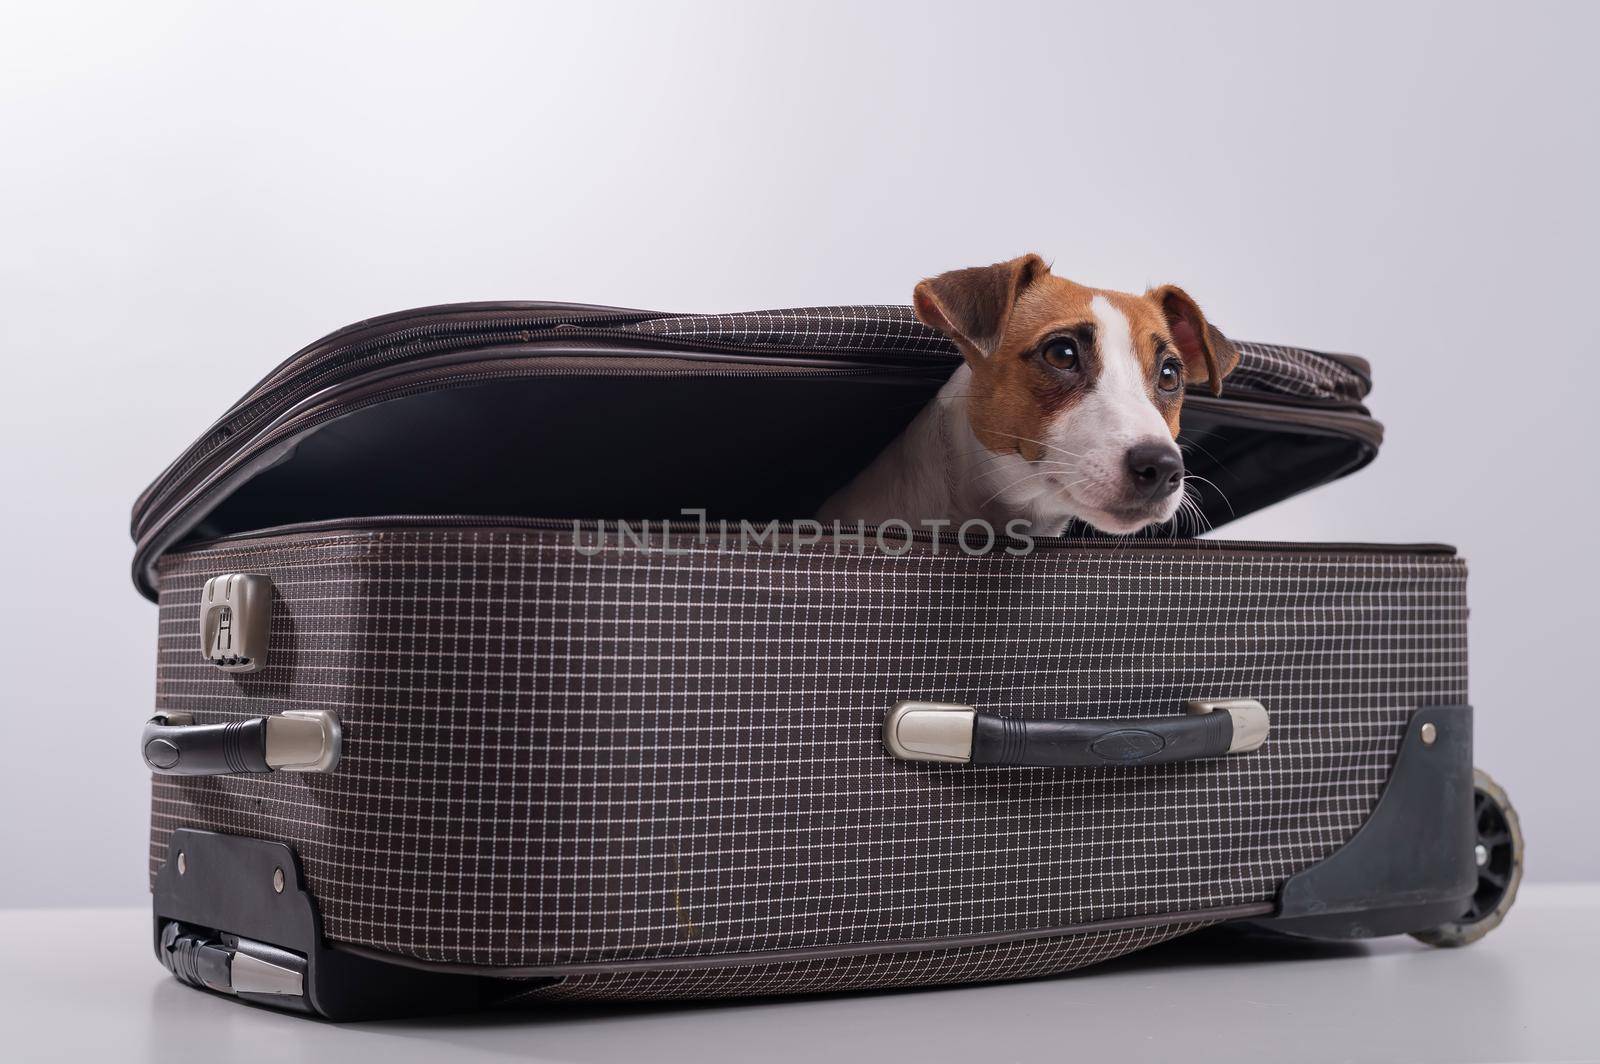 The dog is hiding in a suitcase on a white background. Jack Russell Terrier peeks out of his luggage bag by mrwed54